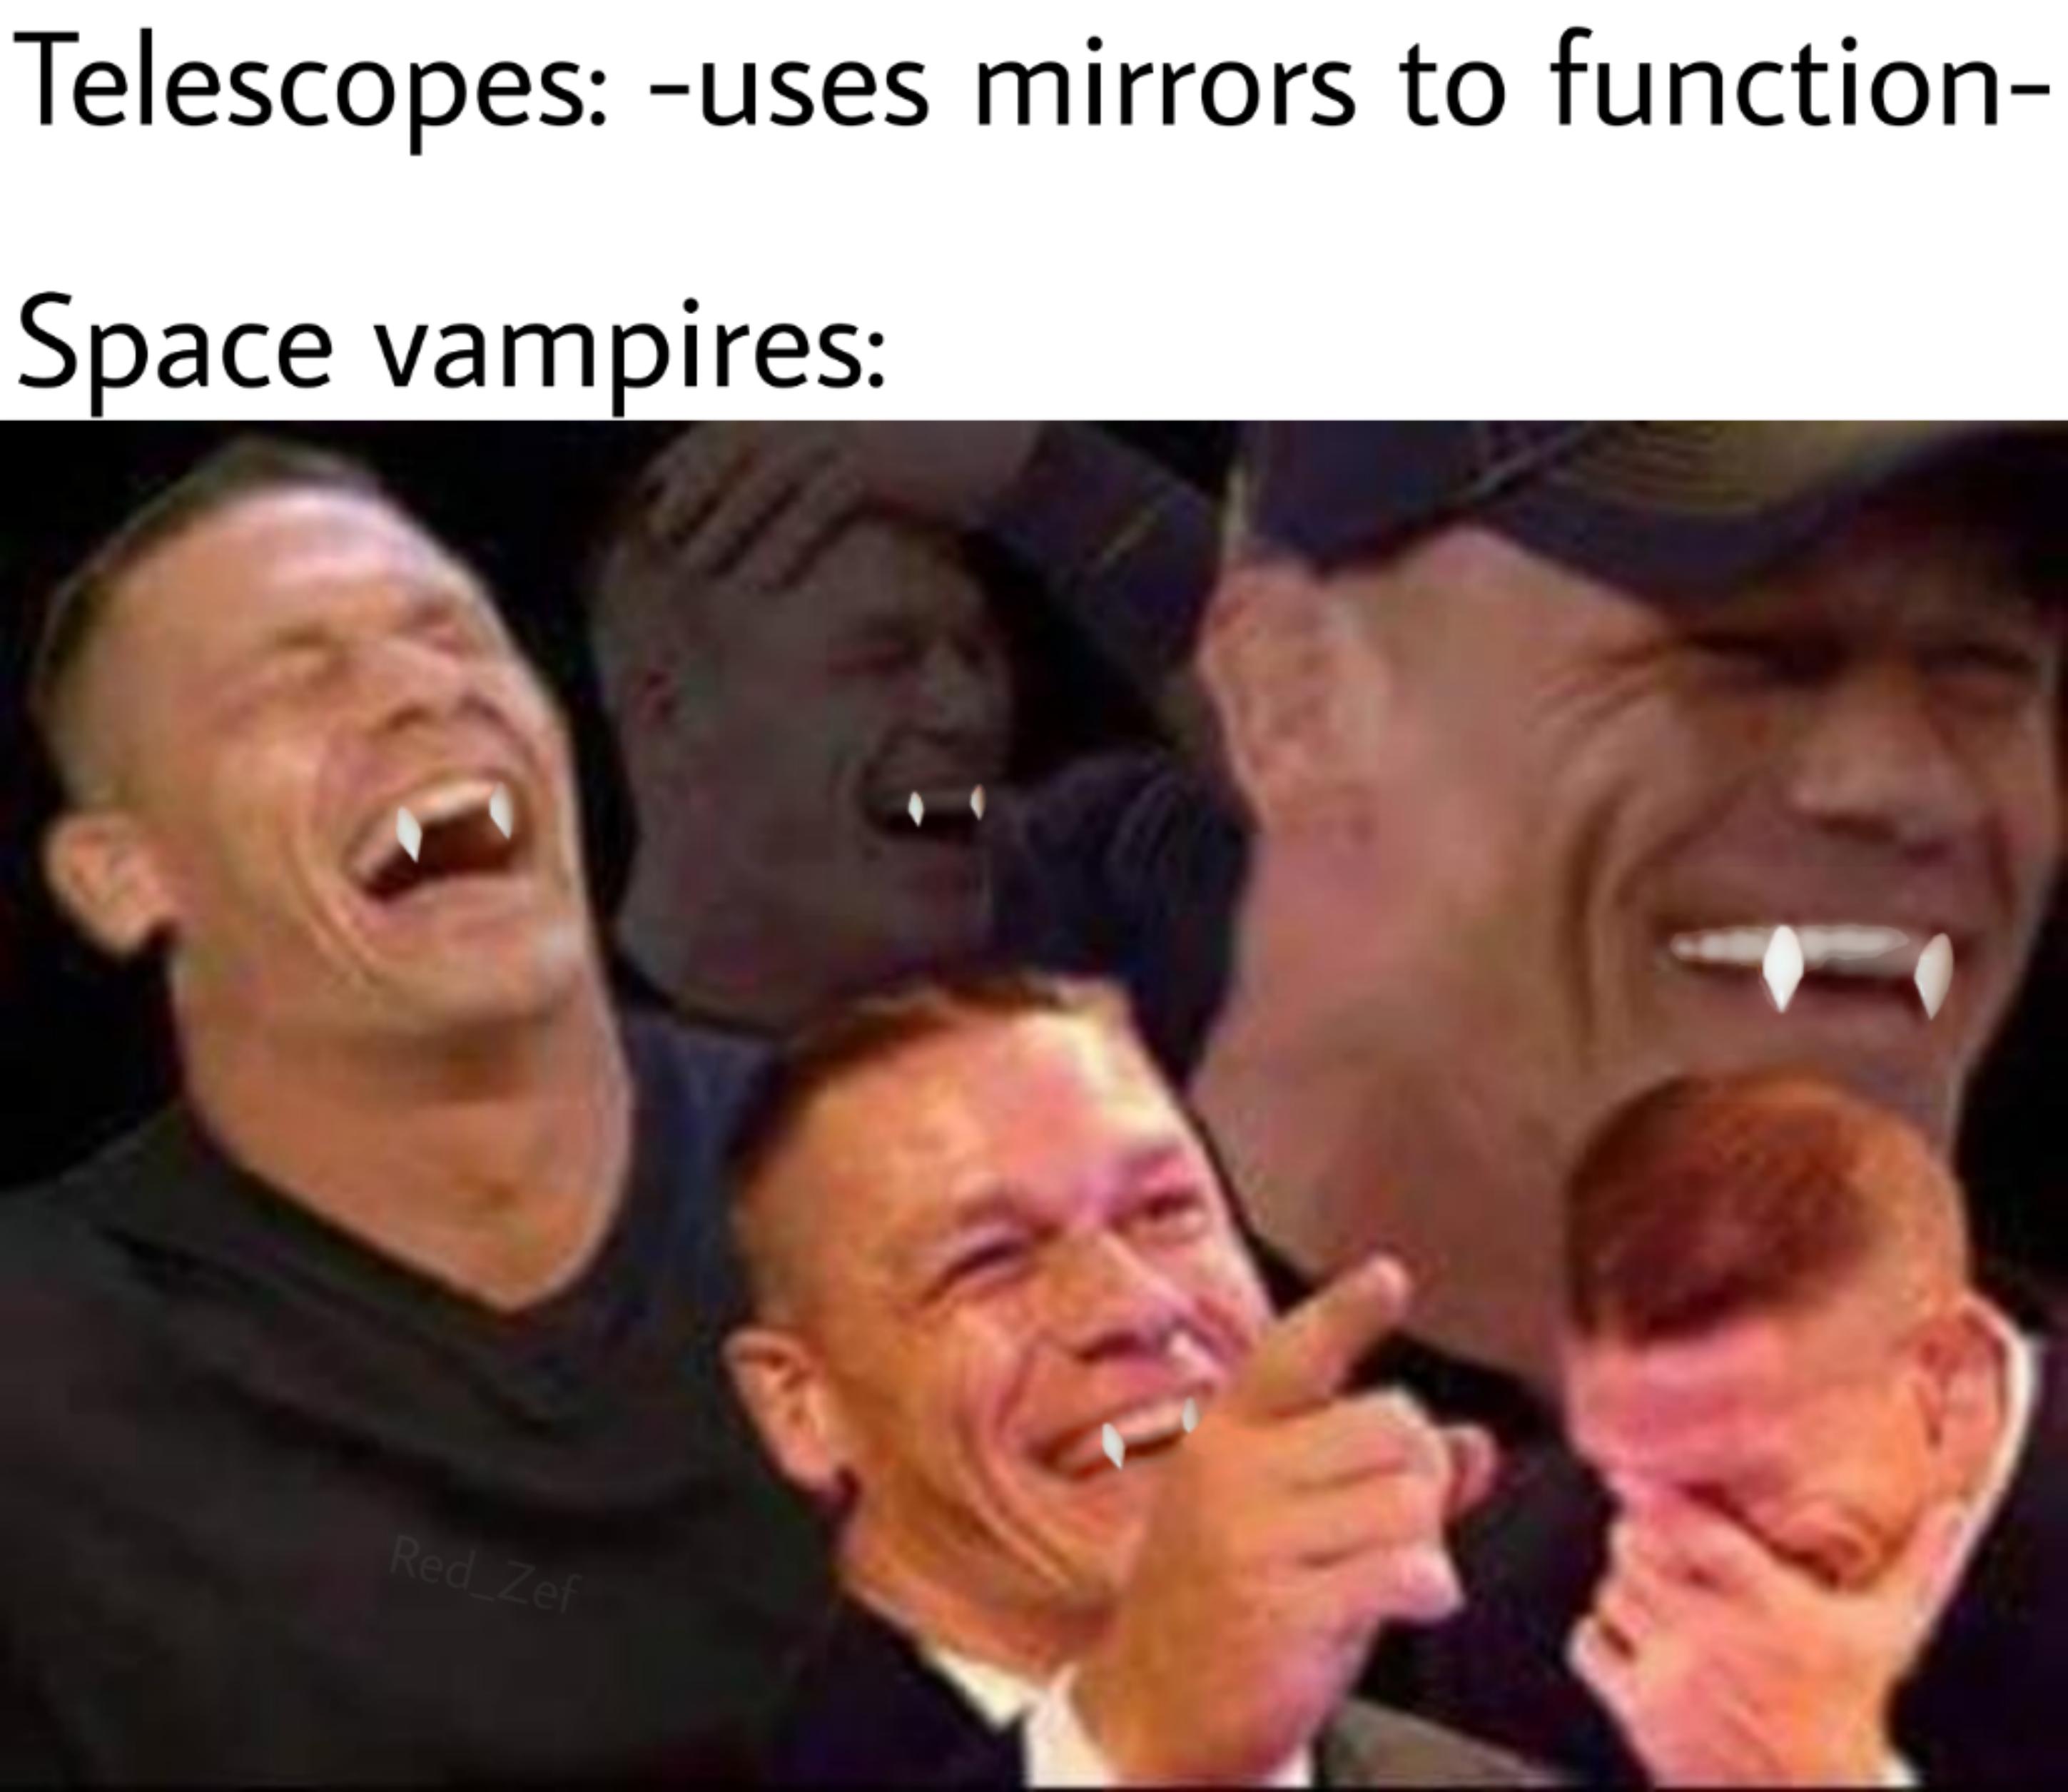 your mum makes a joke meme - Telescopes uses mirrors to function Space vampires Red Zef